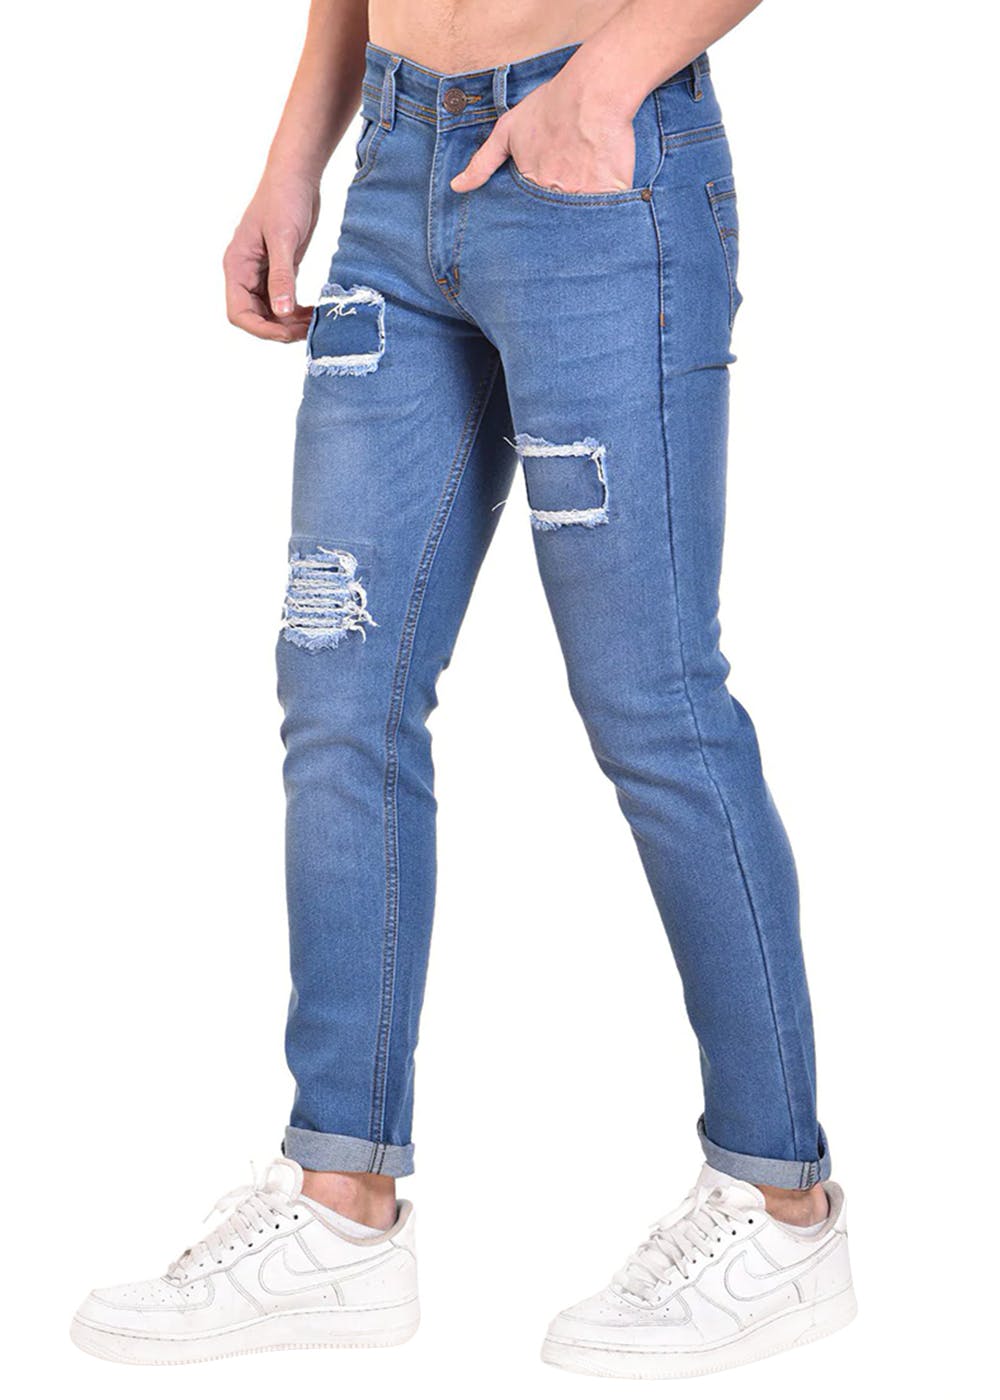 Buy Ripped Jeans Online In India At Best Price Offers | Tata CLiQ